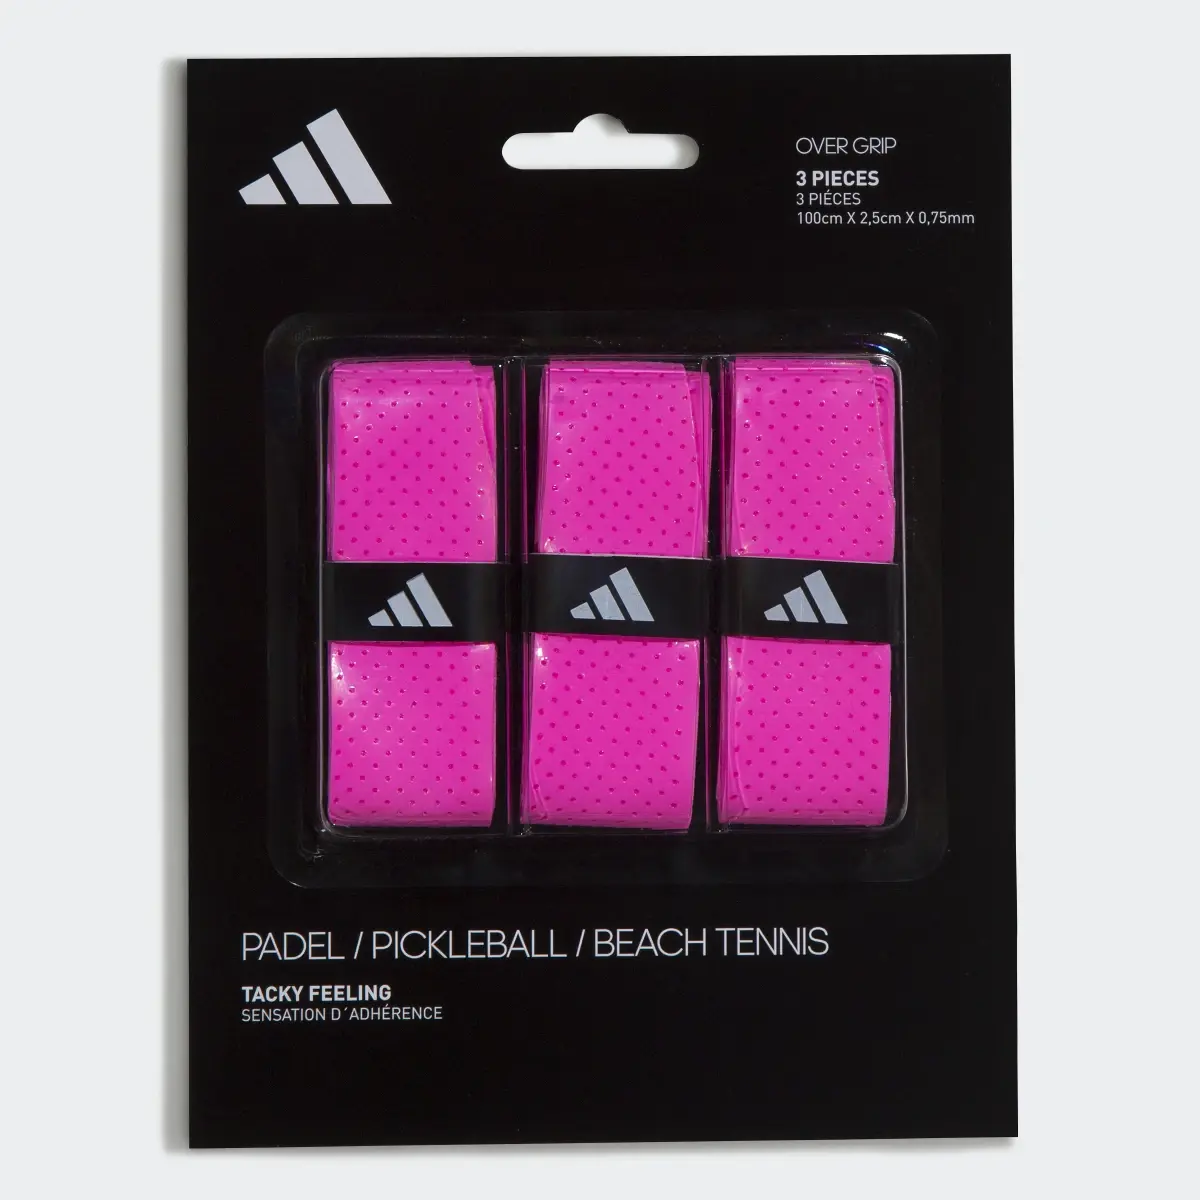 Adidas Set of Overgrips (3 Pieces). 1